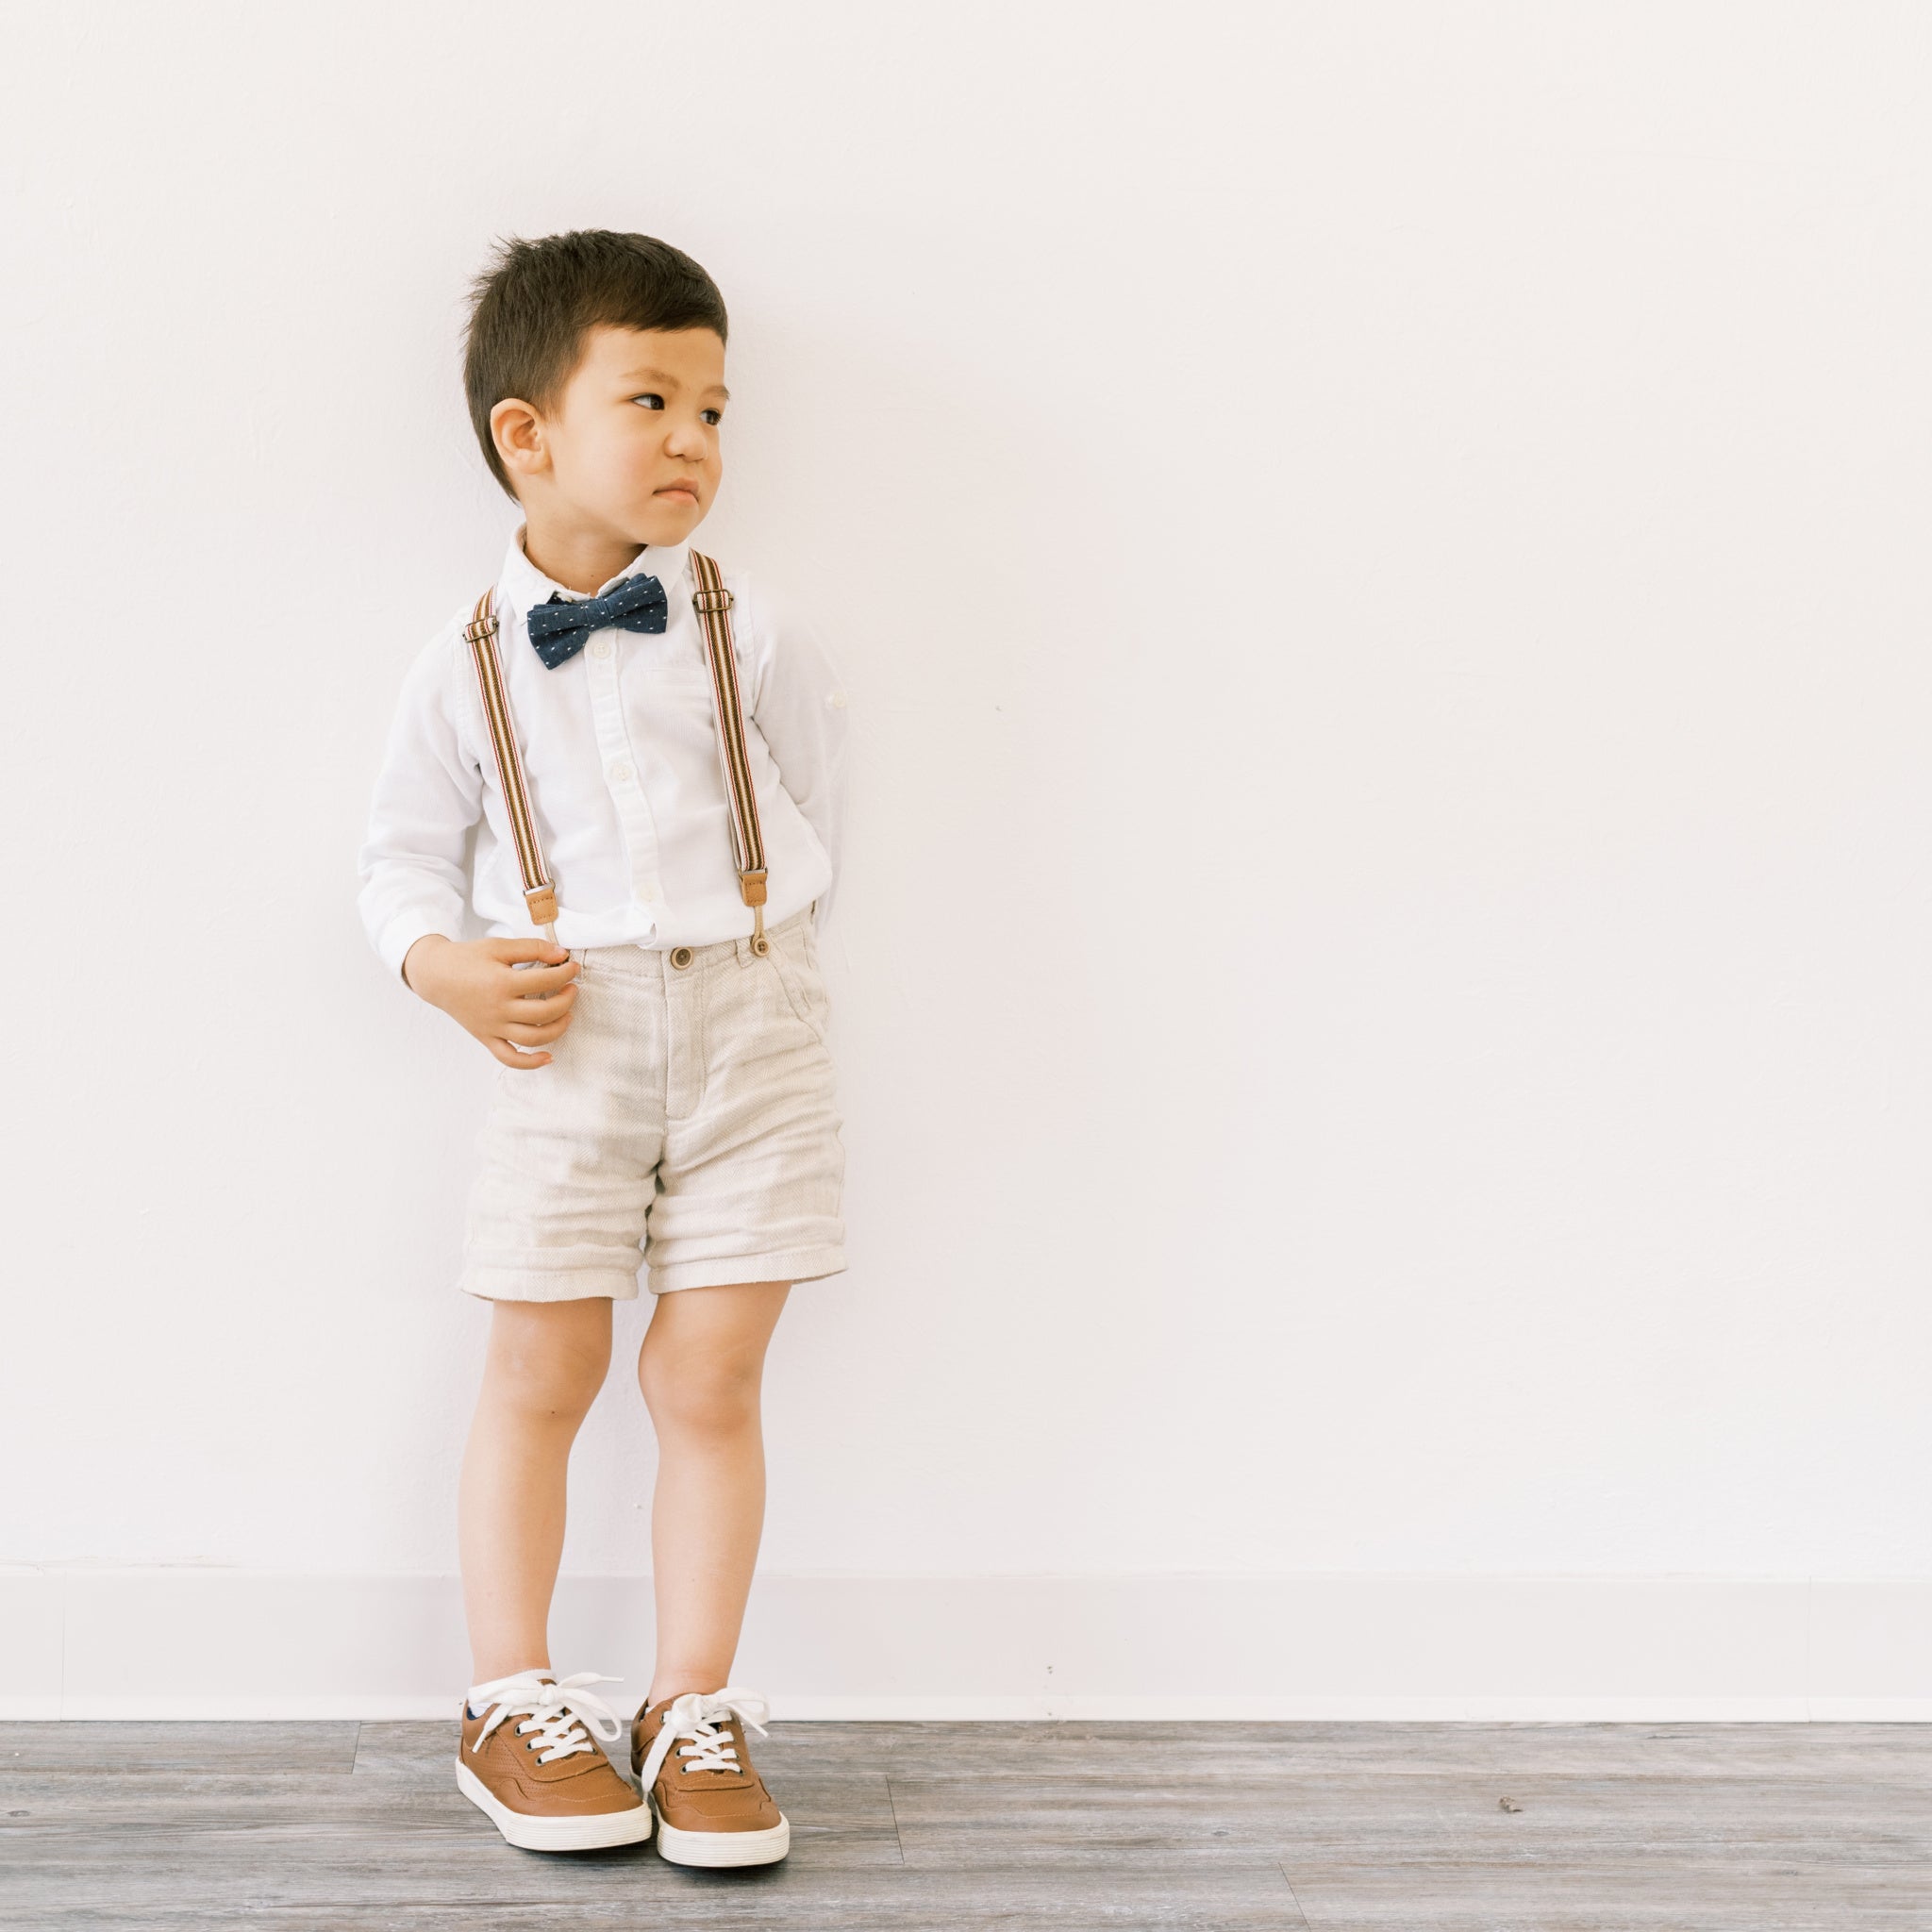 Timothy | Bow Tie